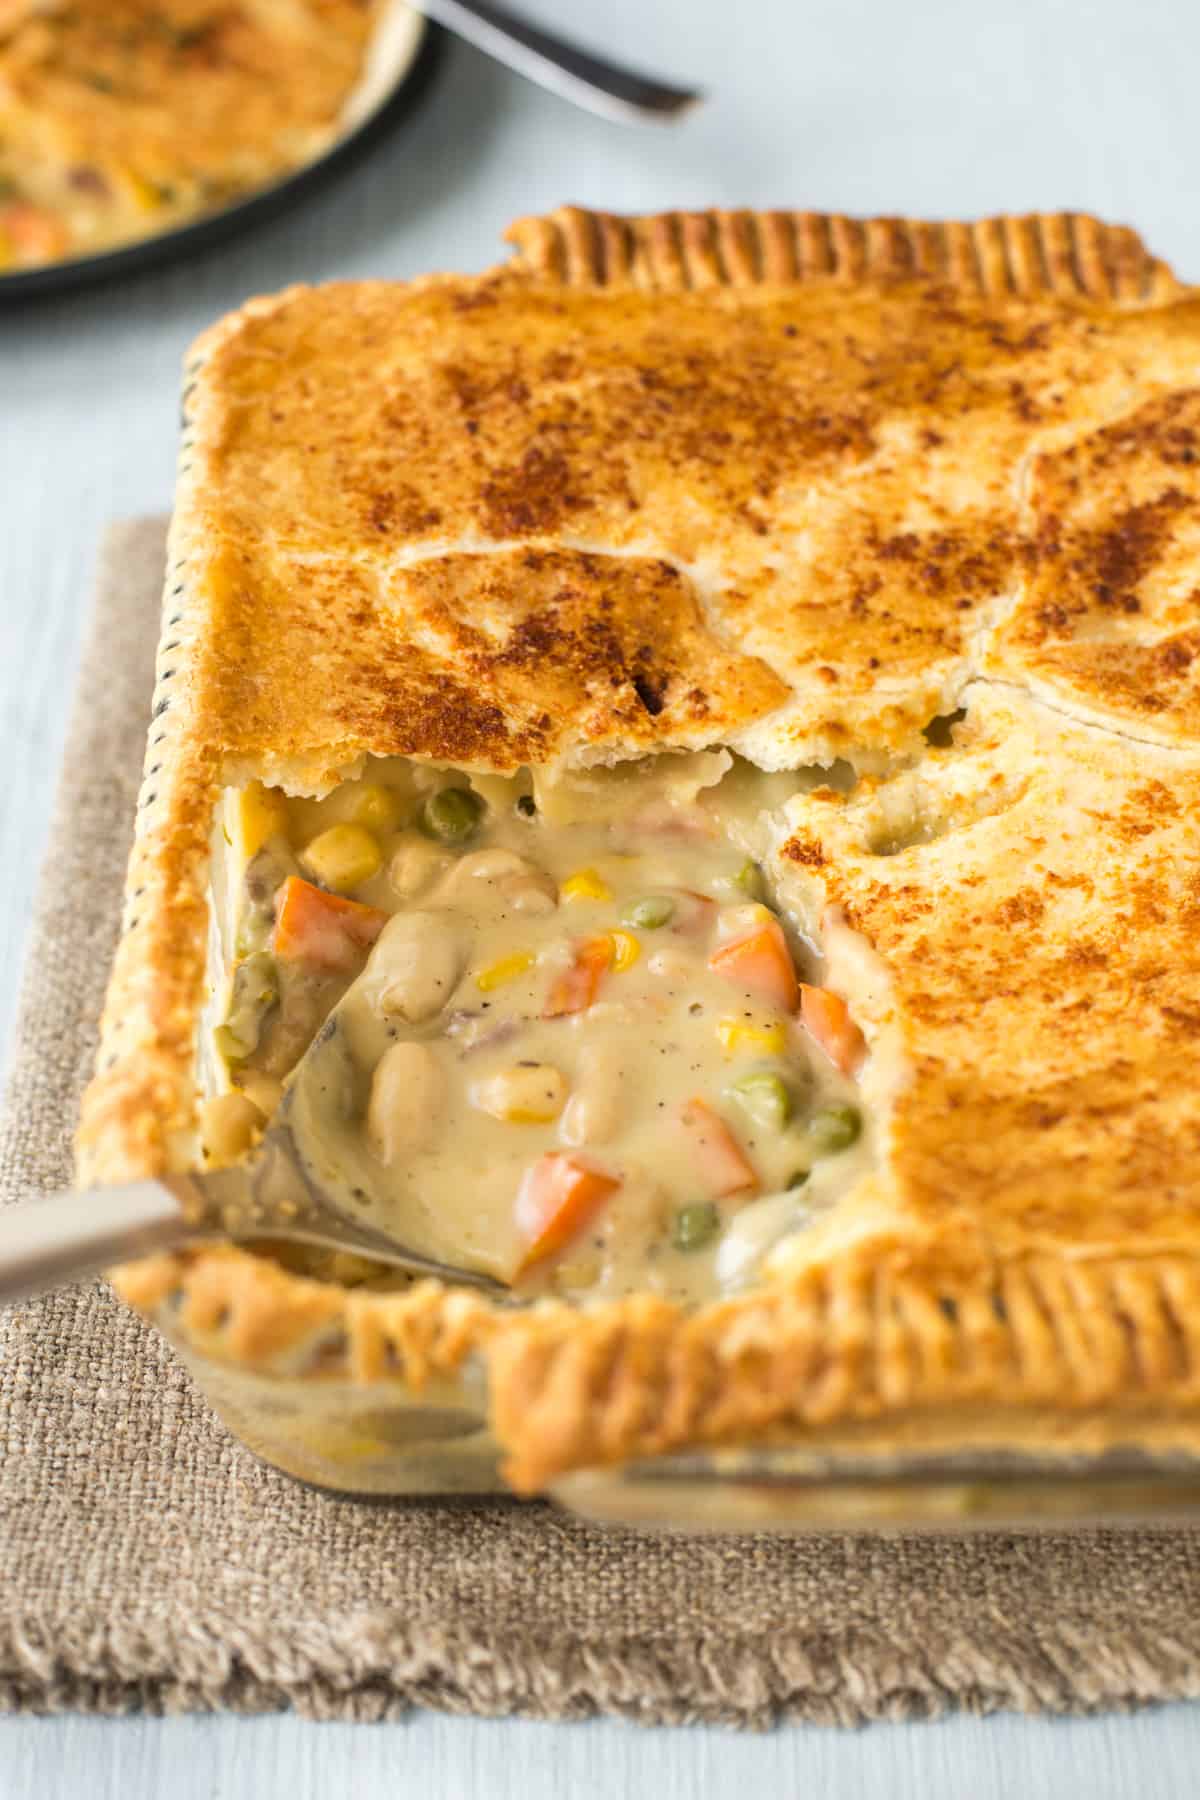 A puff pastry topped pie with cheesy vegetables showing underneath.